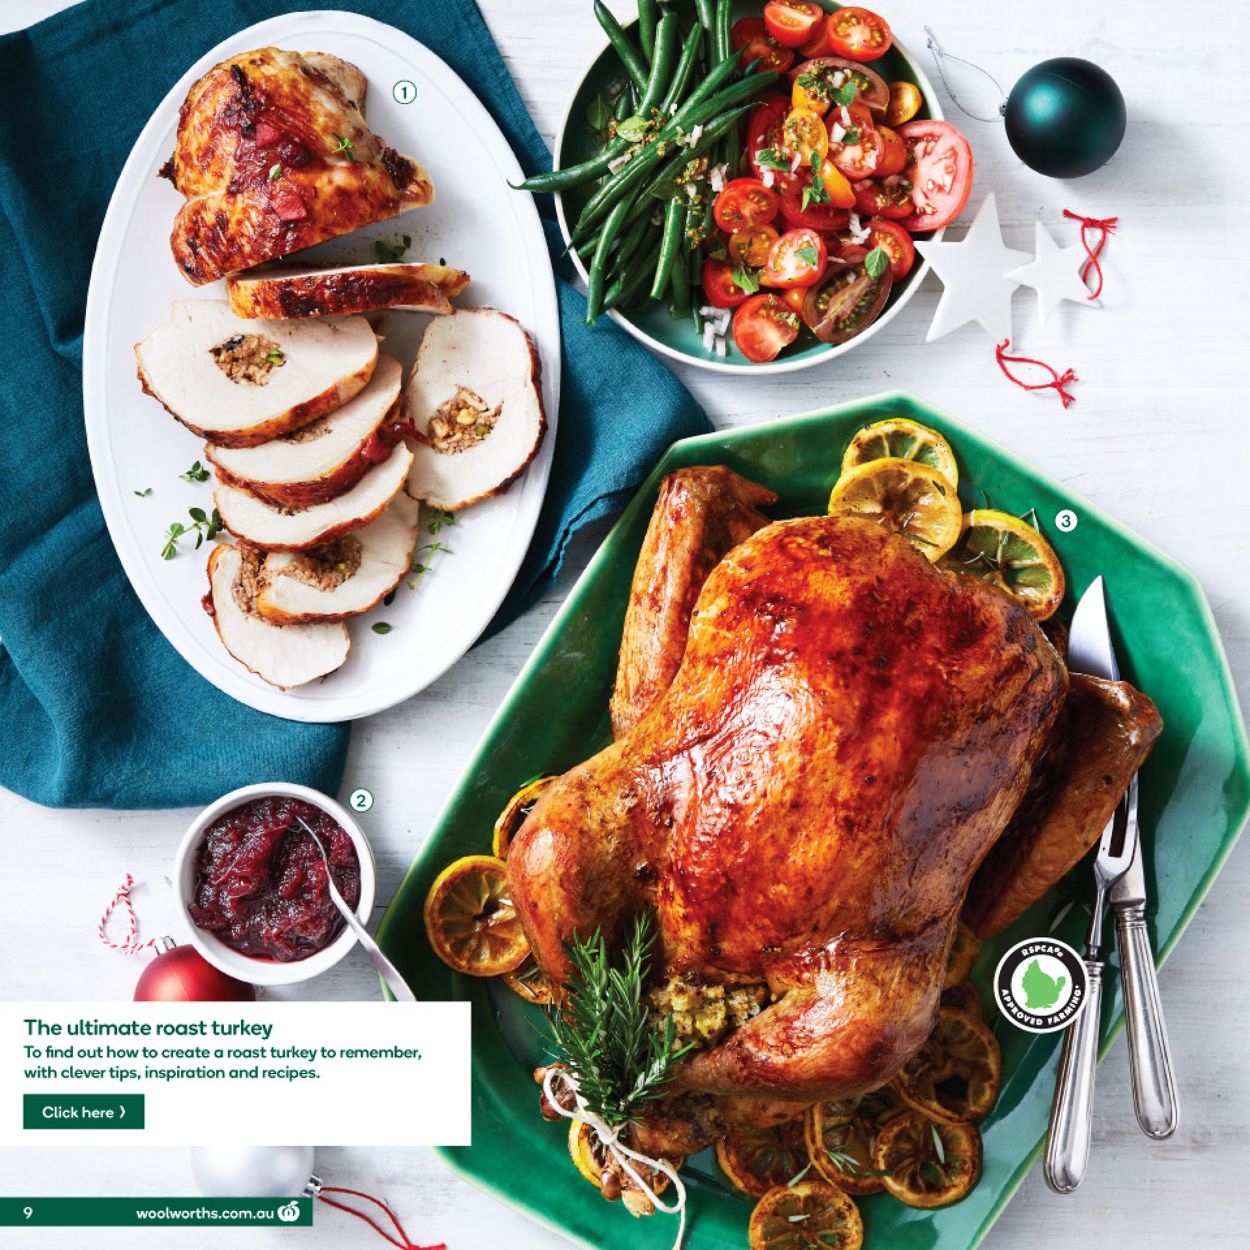 Woolworths HOLIDAYS 2021 Catalogue - 01/12-07/12/2021 (Page 9)